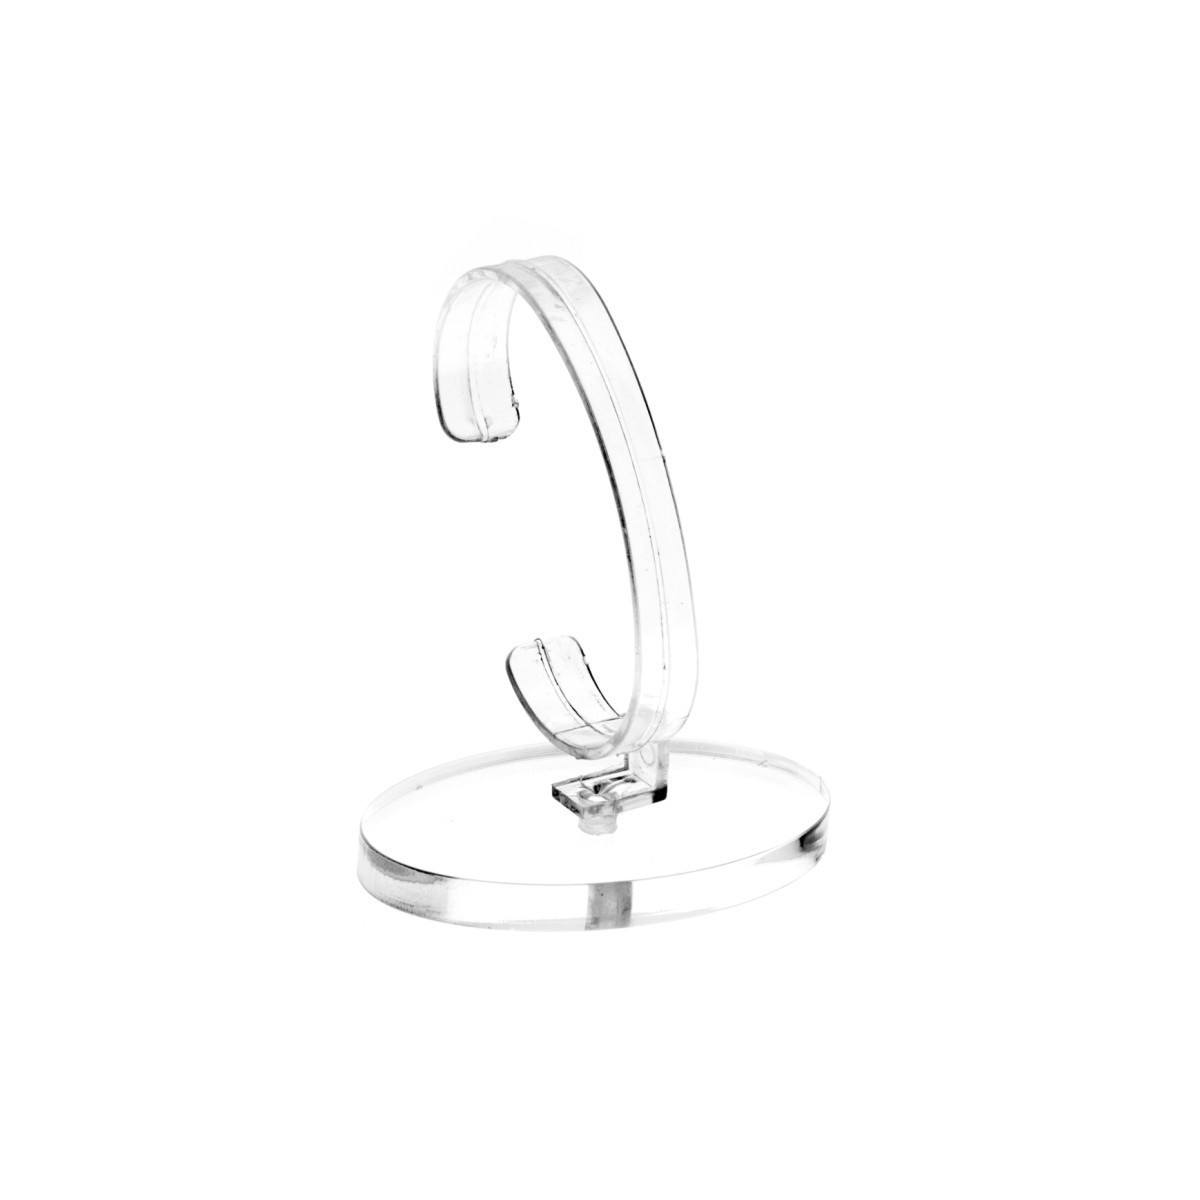 Clear wrist watch display holder stand